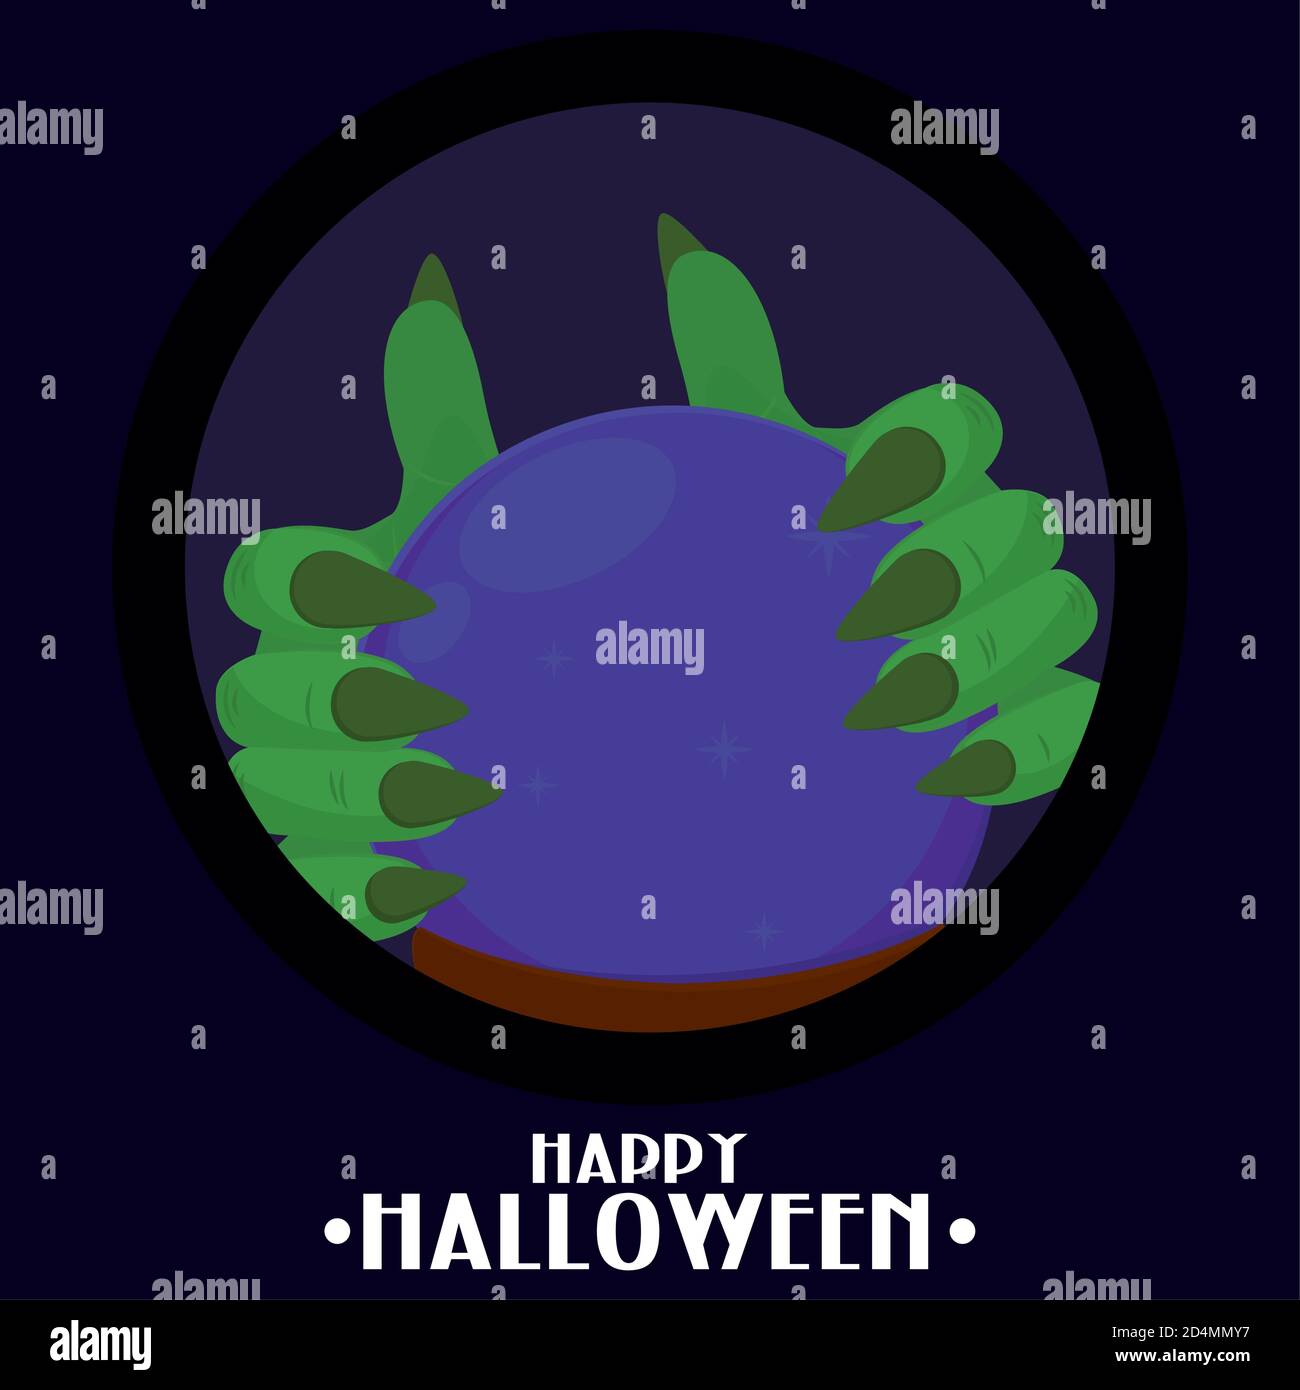 Isolated scary halloween holiday october poster Vector Stock Vector